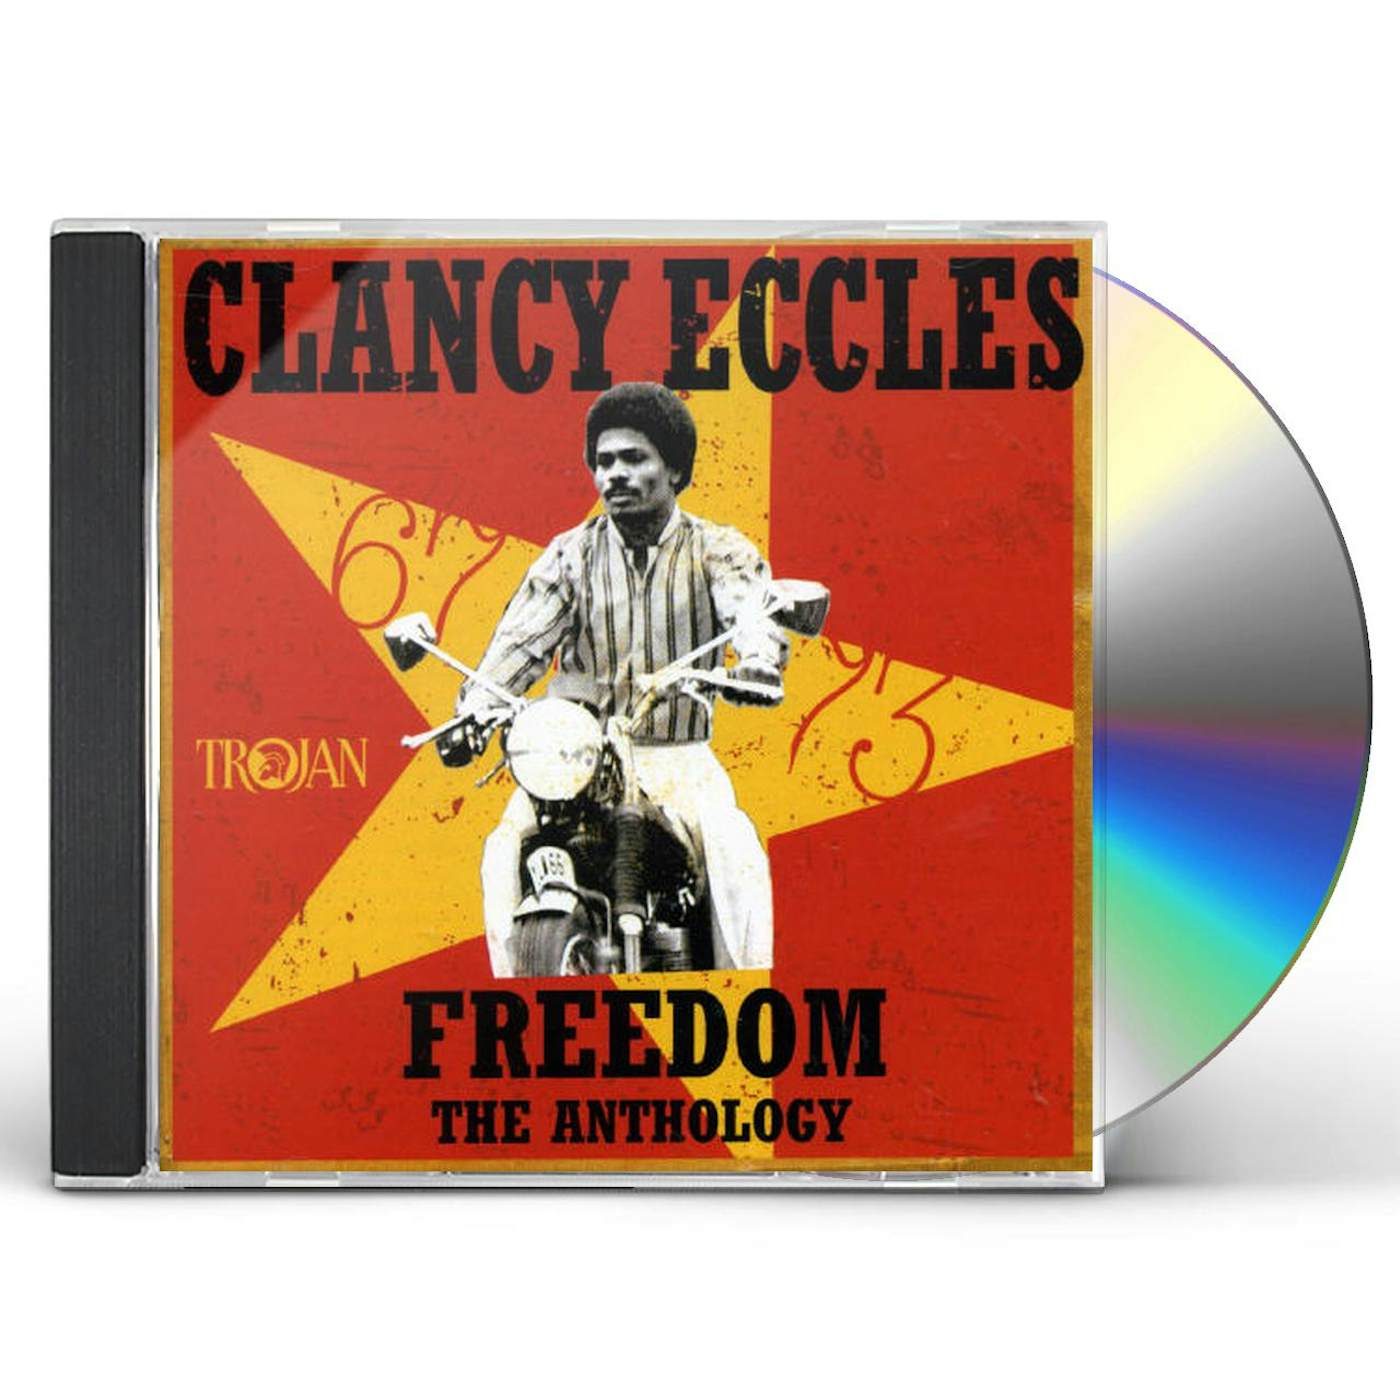 Clancy Eccles FREEDOM: ANTHOLOGY 1967-1973 CD